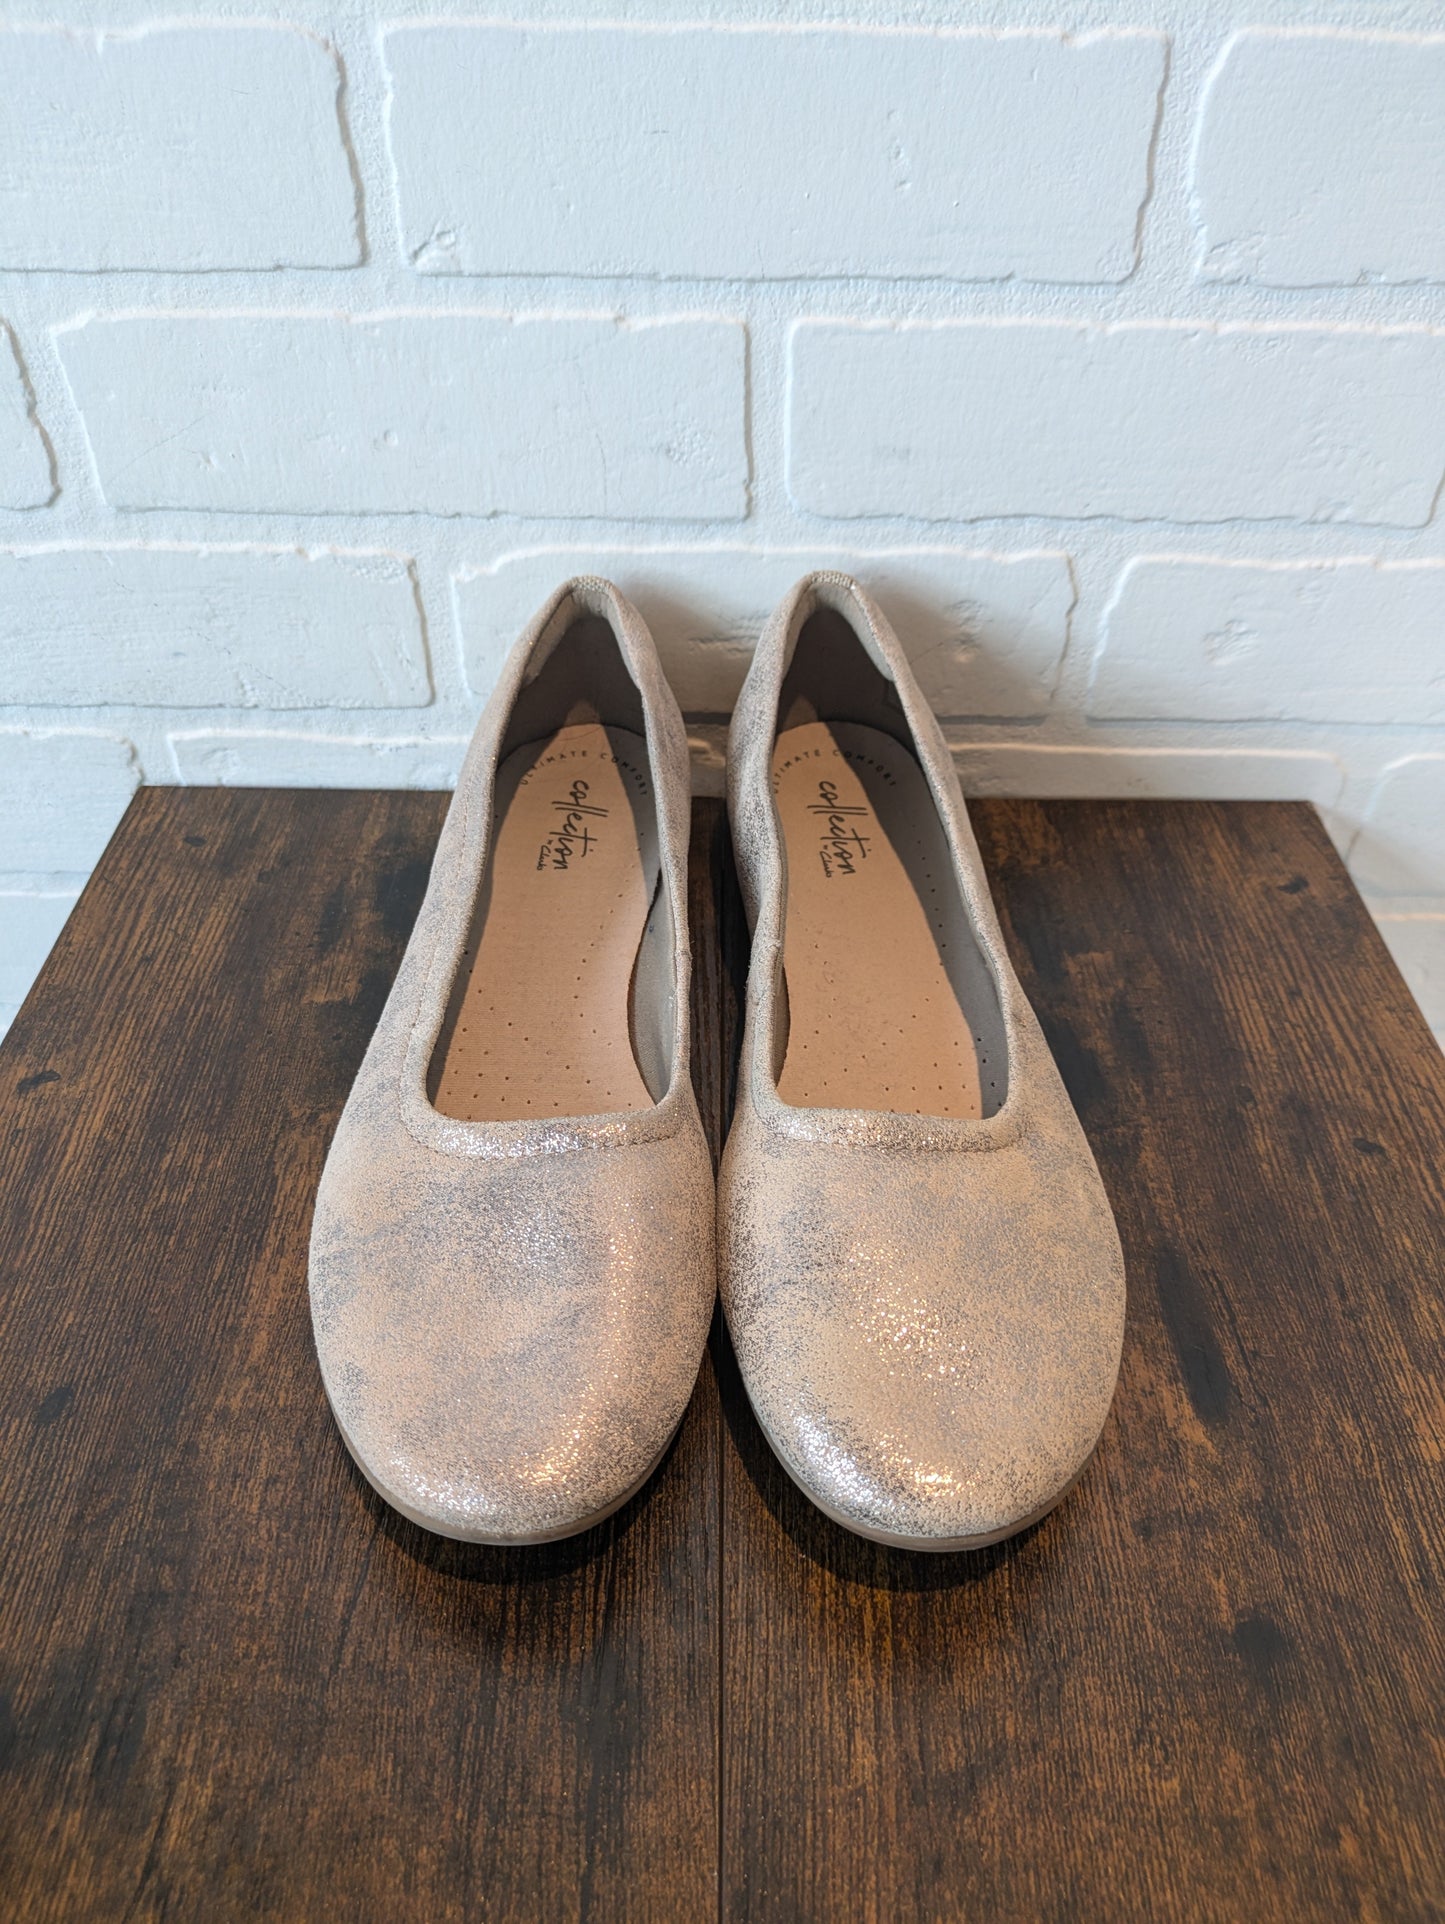 Gold Shoes Flats Clarks, Size 7.5